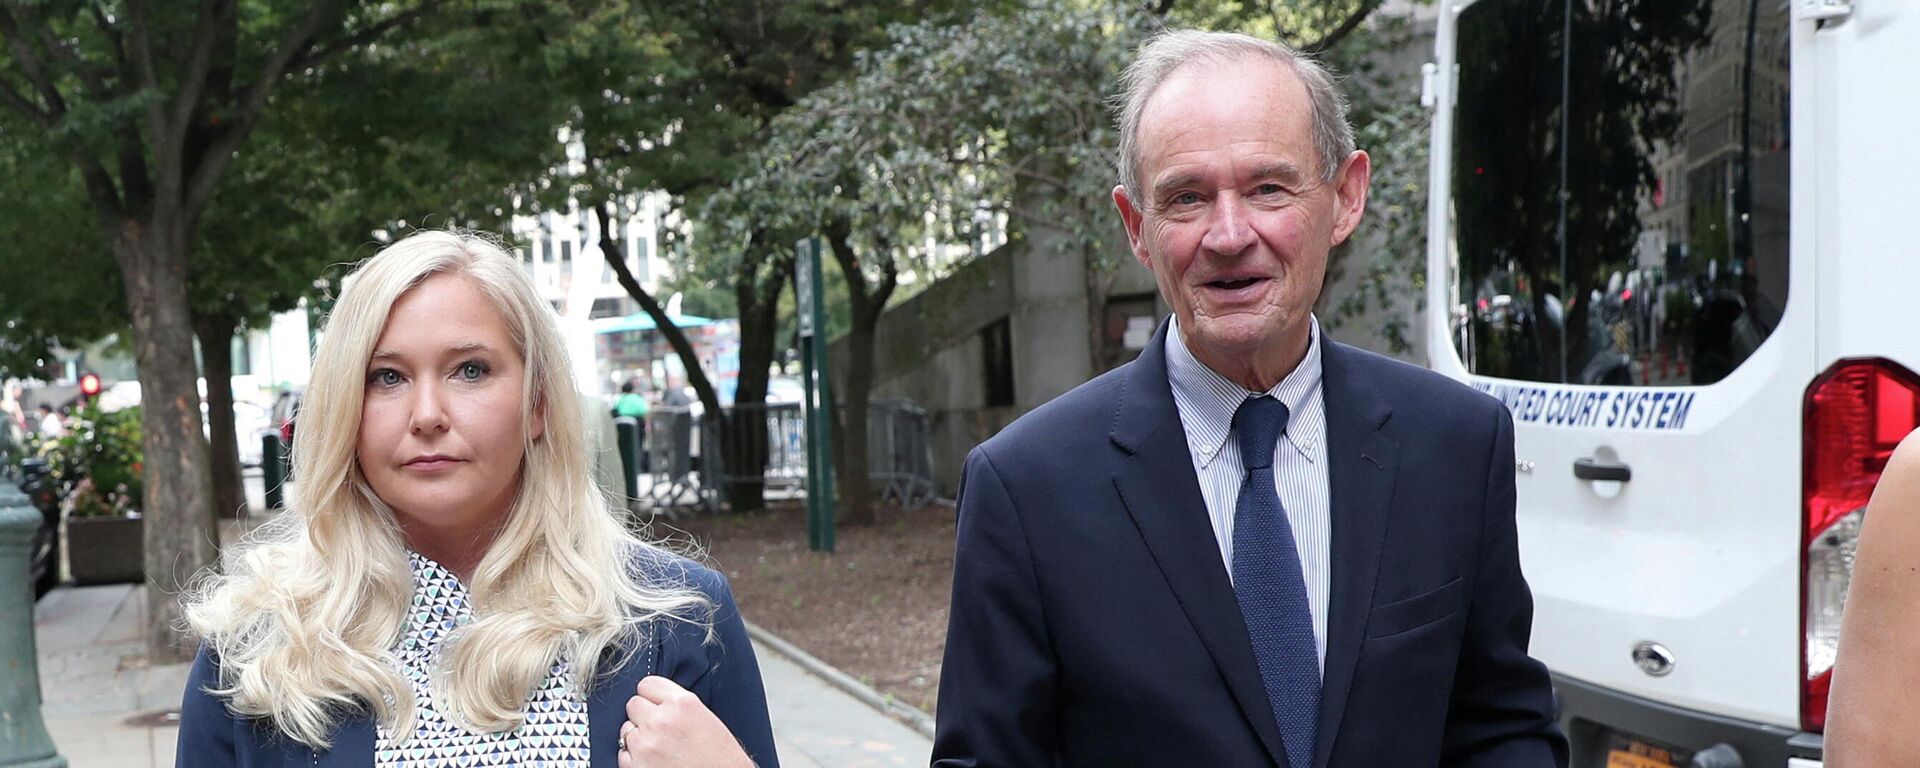 FILE PHOTO: Lawyer David Boies arrives with his client Virginia Giuffre for hearing in the criminal case against Jeffrey Epstein, at Federal Court in New York - Sputnik International, 1920, 30.12.2021